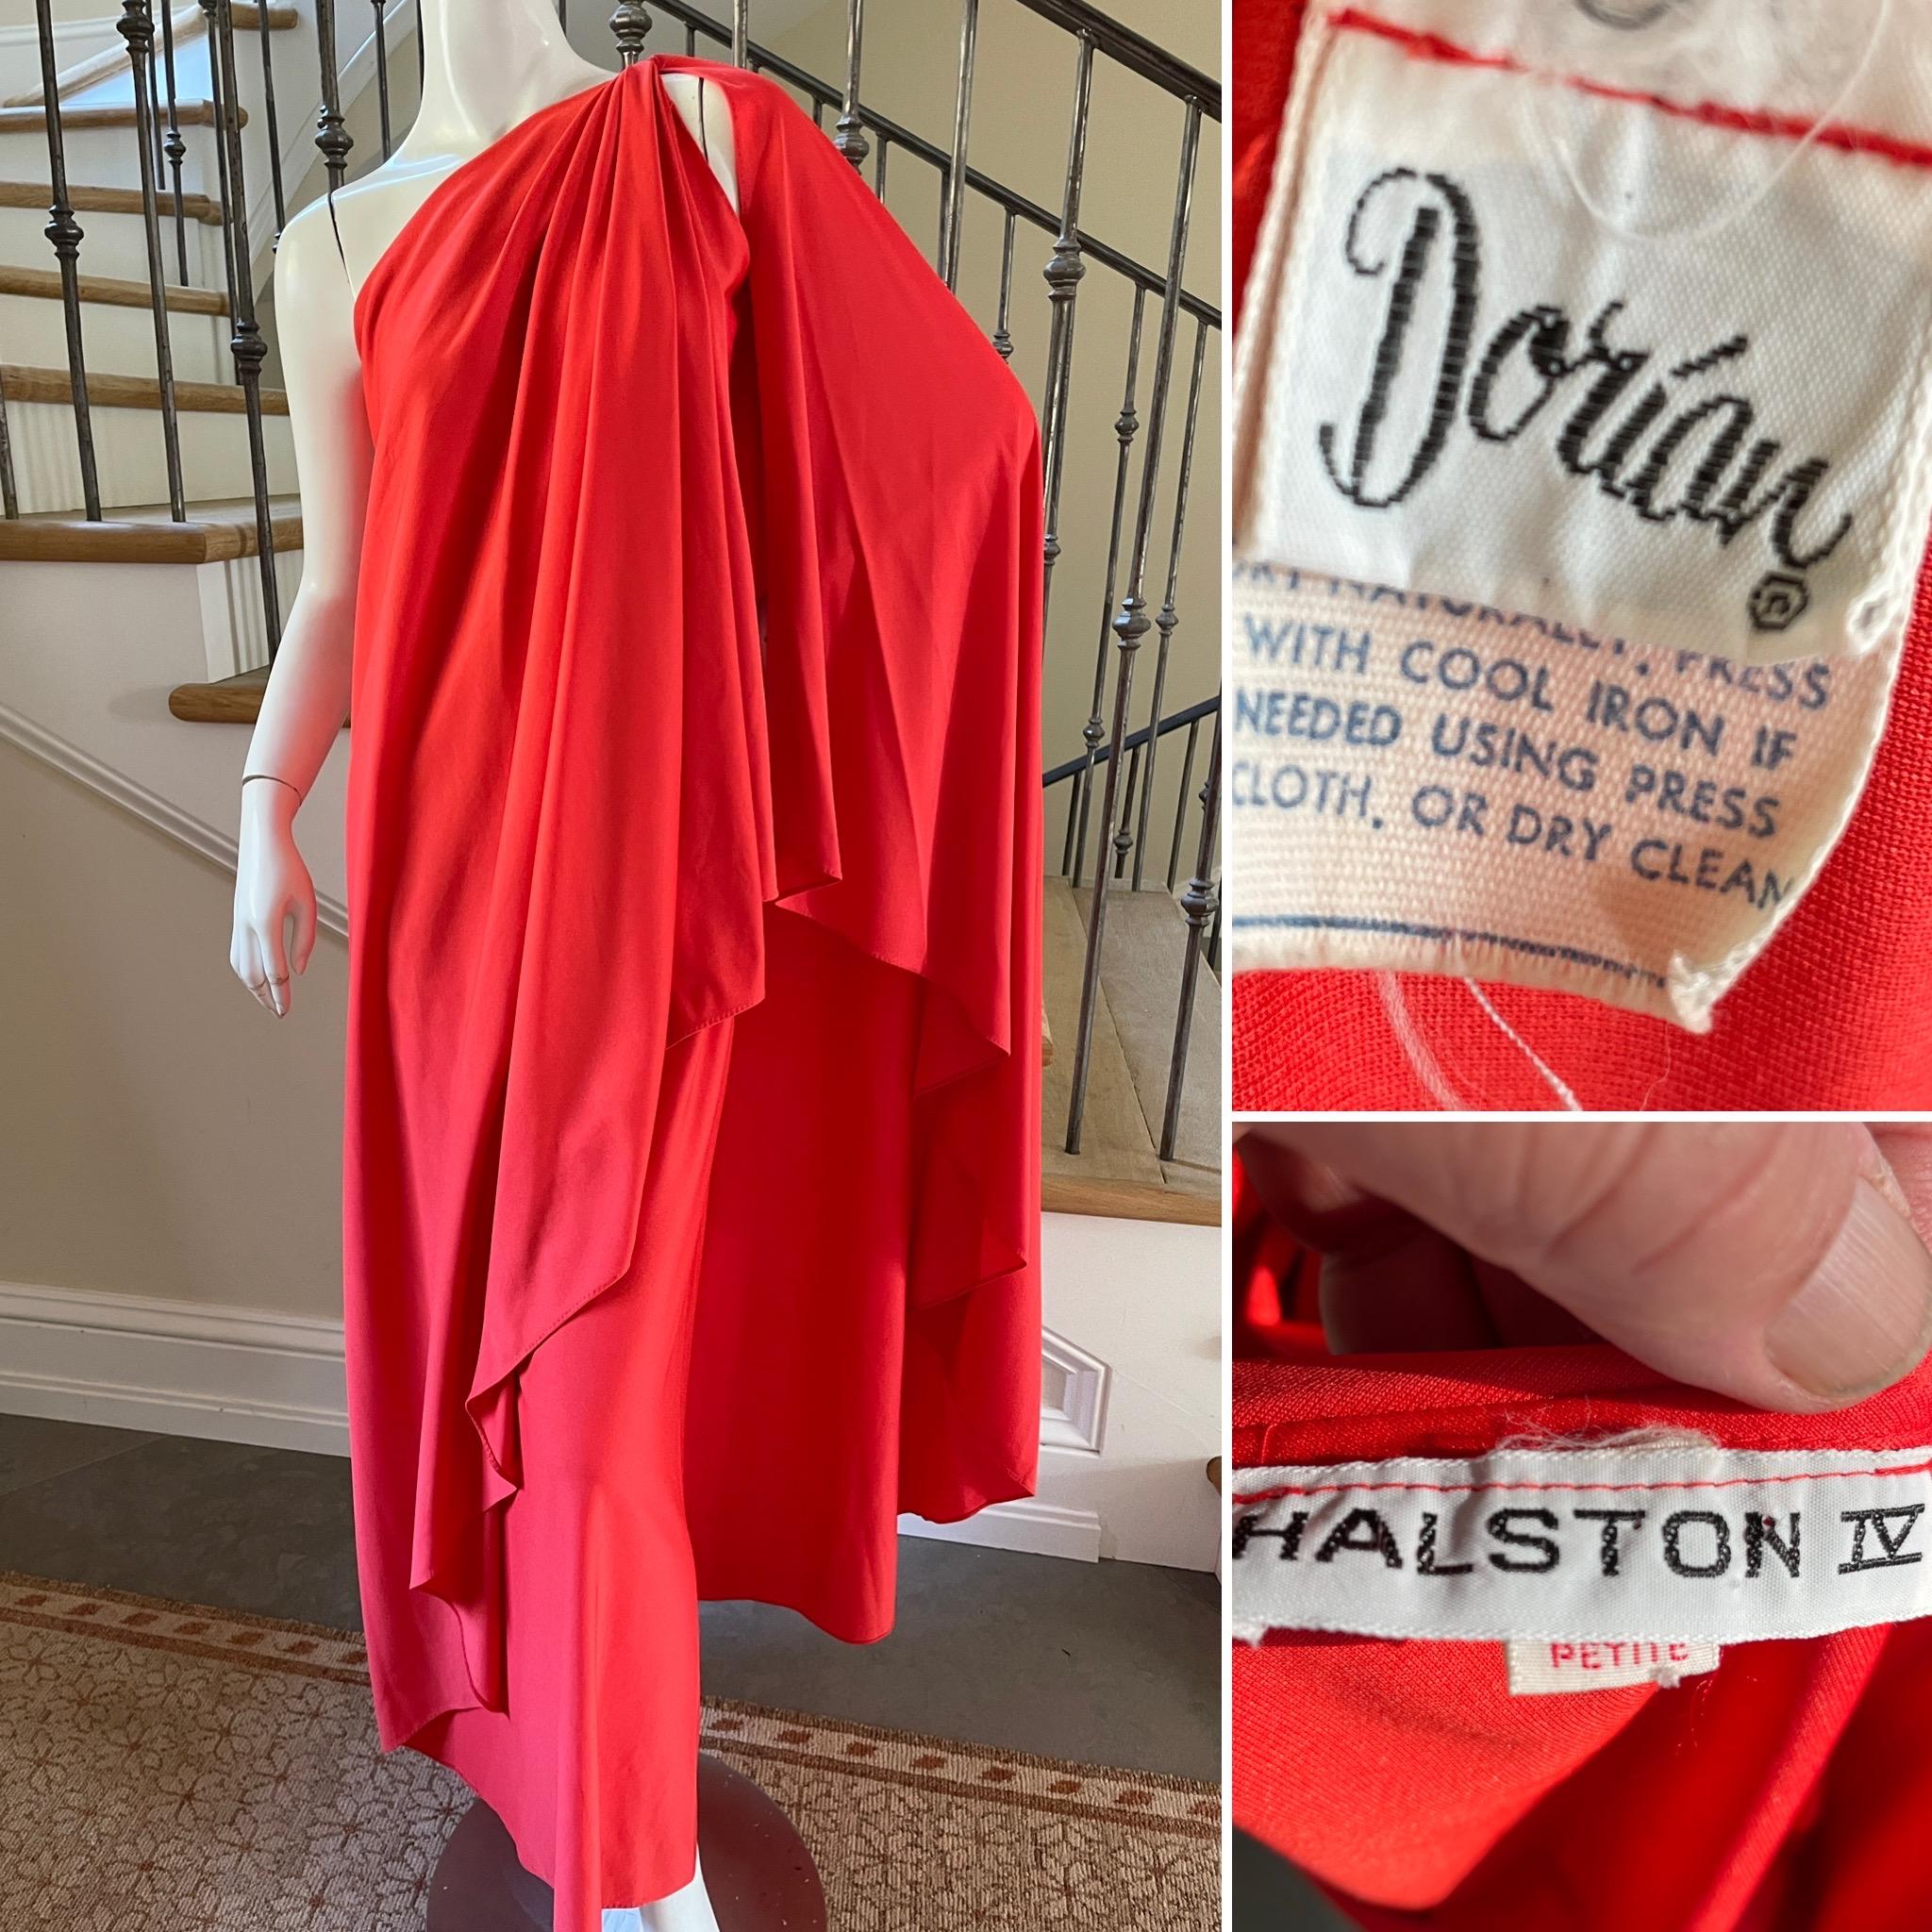 Halston Vintage 1980's Coral Red Dorian Caftan Dress for Halston IV In Excellent Condition For Sale In Cloverdale, CA